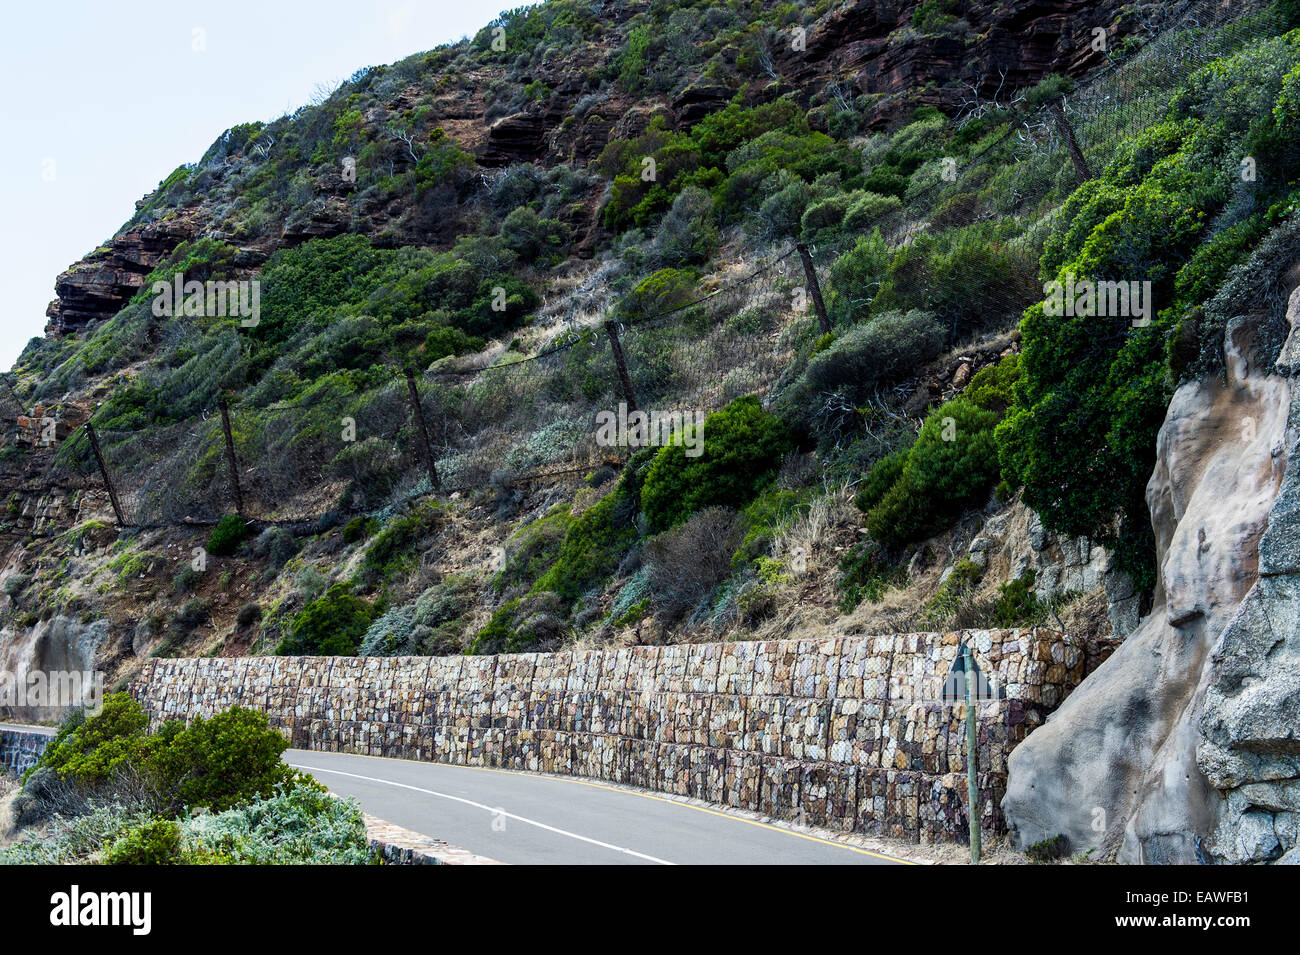 Wire mesh netting catches boulders that fall from a cliff onto a road. Stock Photo